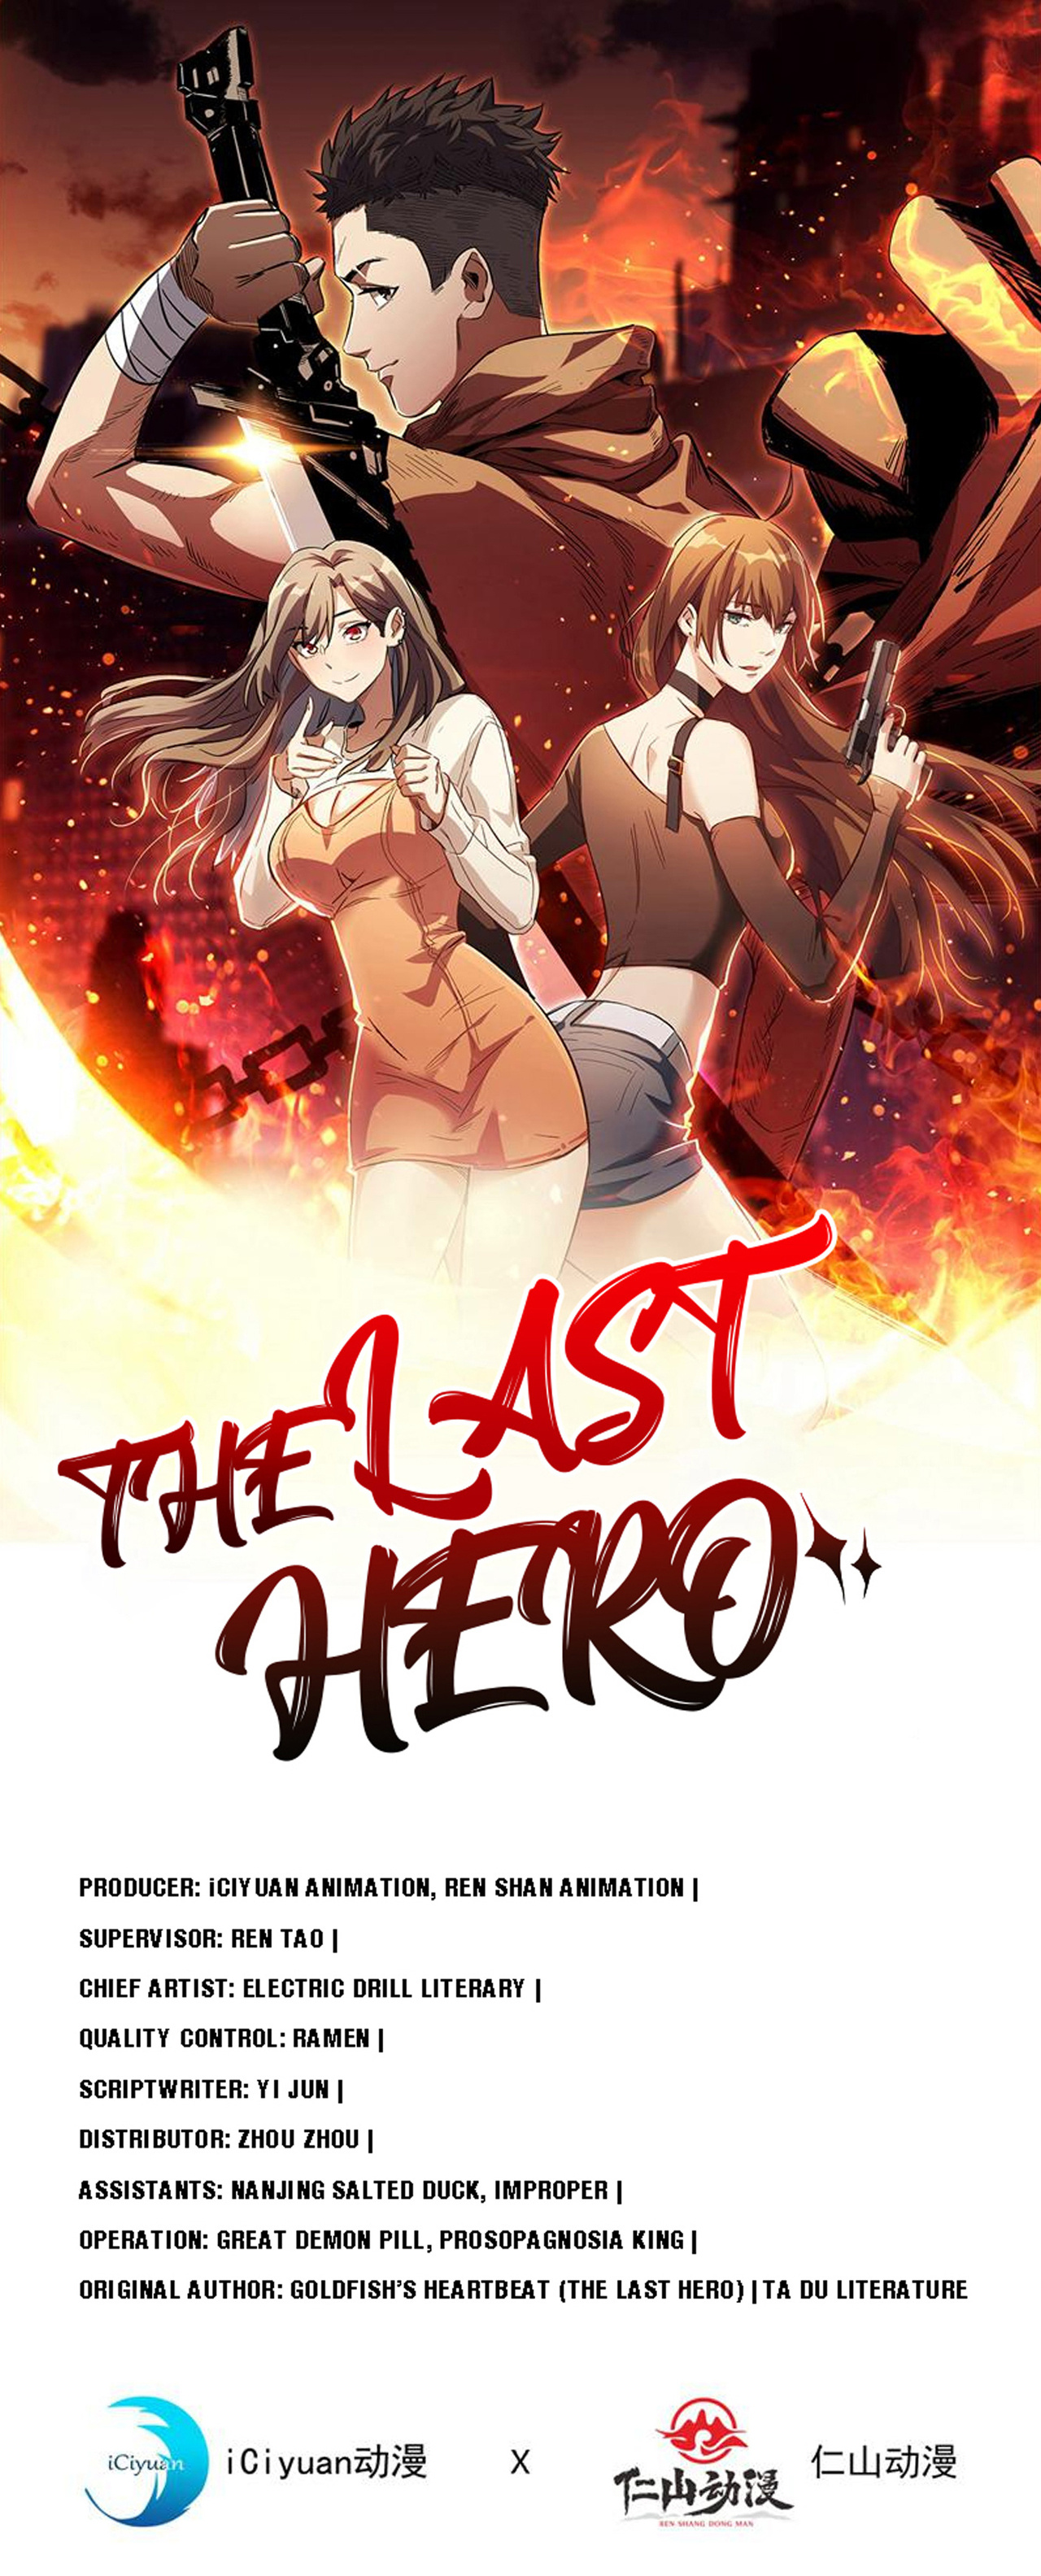 The Last Hero, I Am Picking up Attributes and Items in Last Days 151